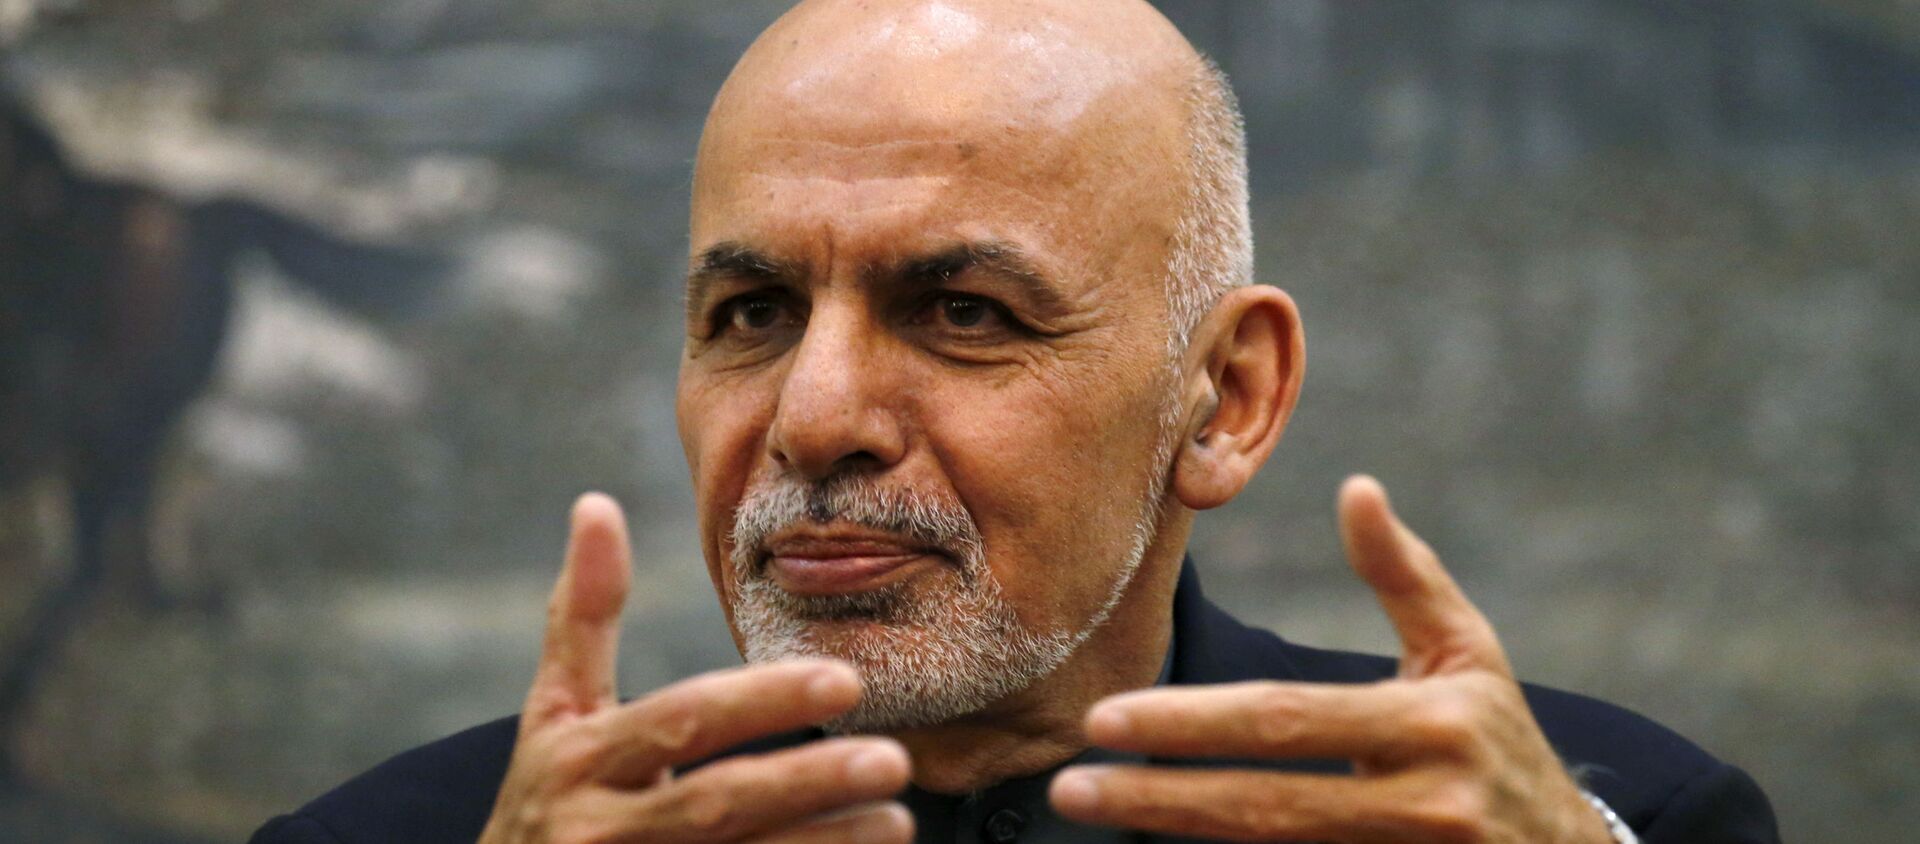 FILE PHOTO: Afghanistan's President Ashraf Ghani speaks during a news conference in Kabul, Afghanistan December 7, 2015. Ghani confirmed on Monday that he would travel to Pakistan for a regional conference on Afghanistan, in a sign of fresh efforts to reduce tension between the two neighbouring countries.  REUTERS/Stringer/File Photo - Sputnik International, 1920